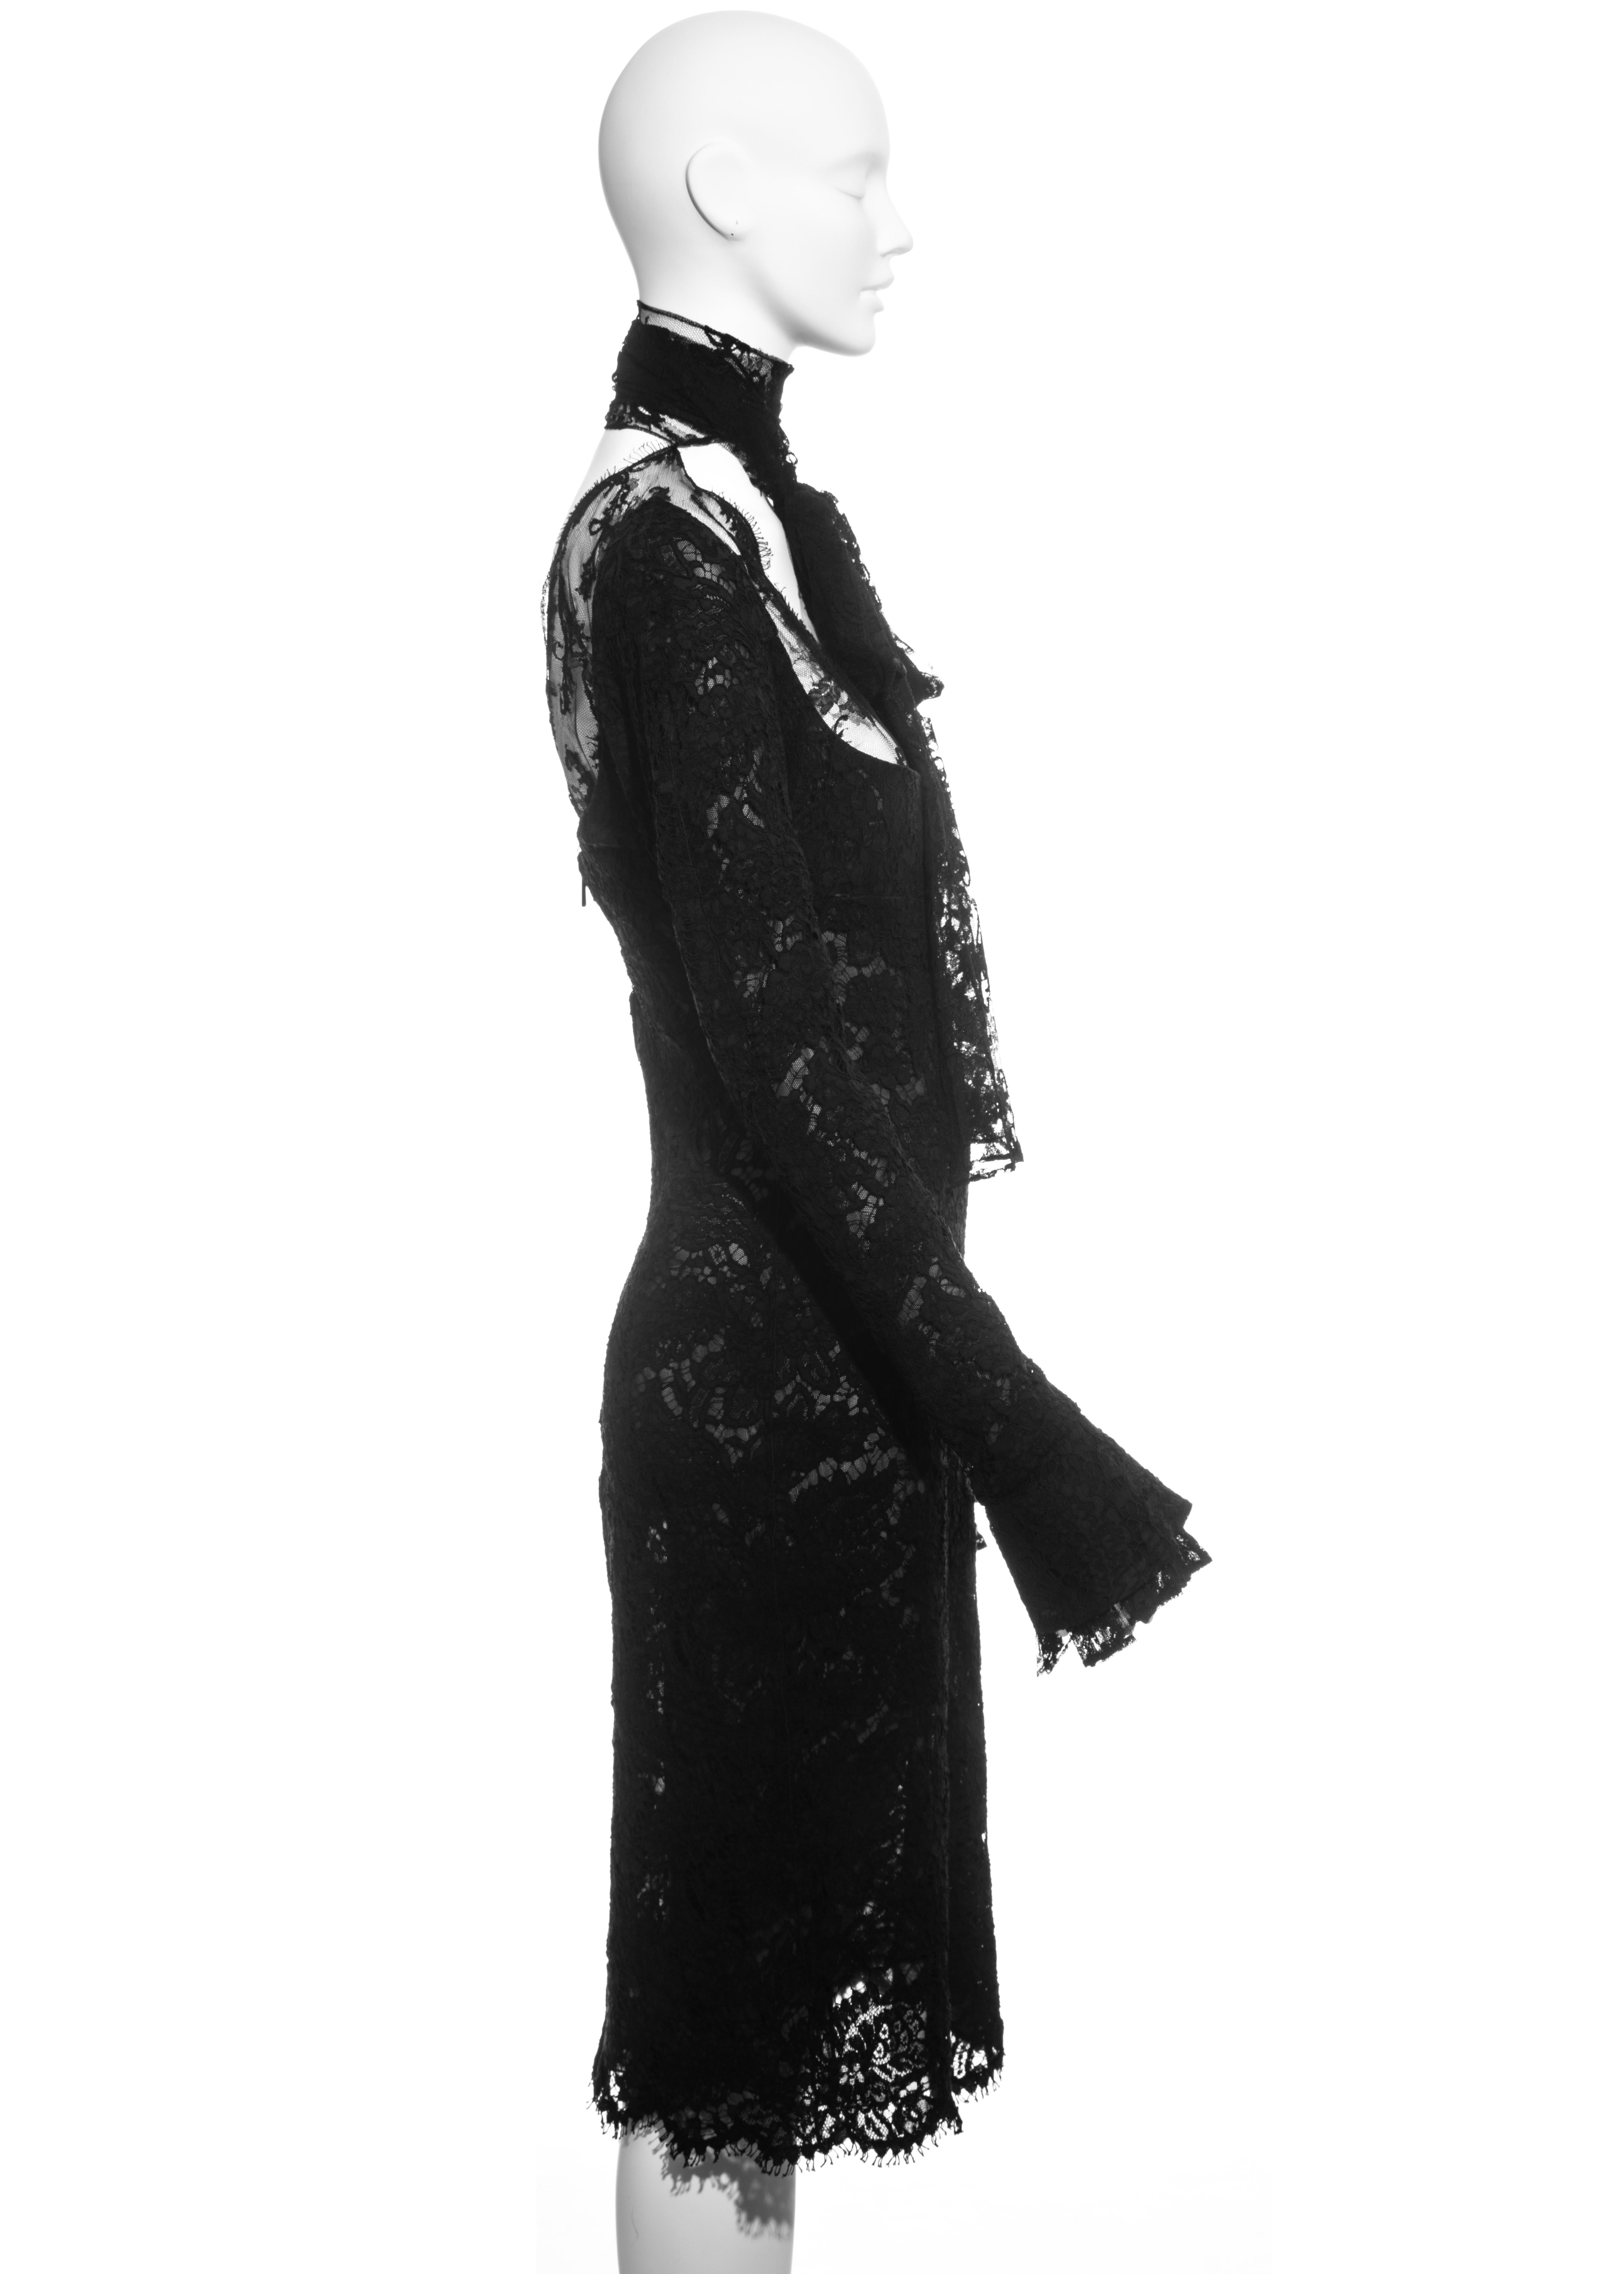 Yves Saint Laurent by Tom Ford black lace long-sleeve evening dress, fw 2002 For Sale 2